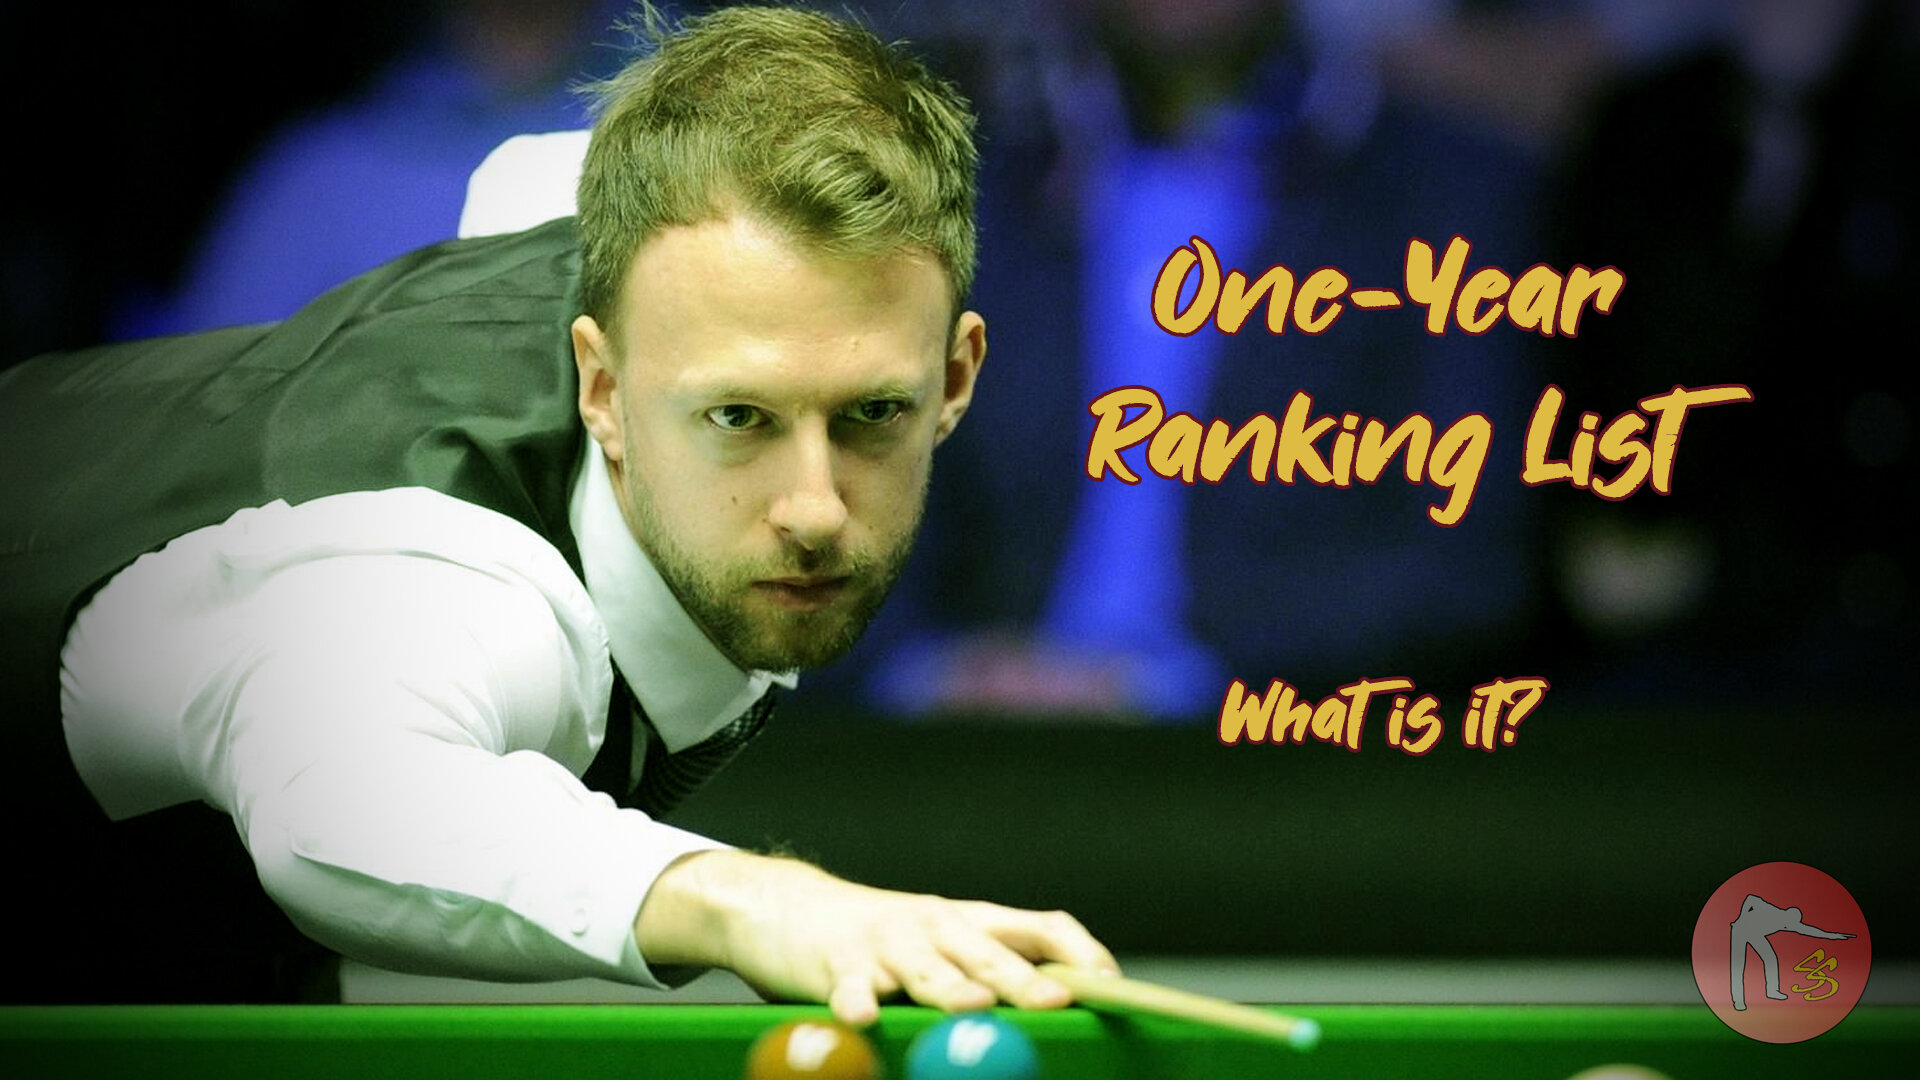 What is Snookers One-Year Ranking List? — Snooker Shorts